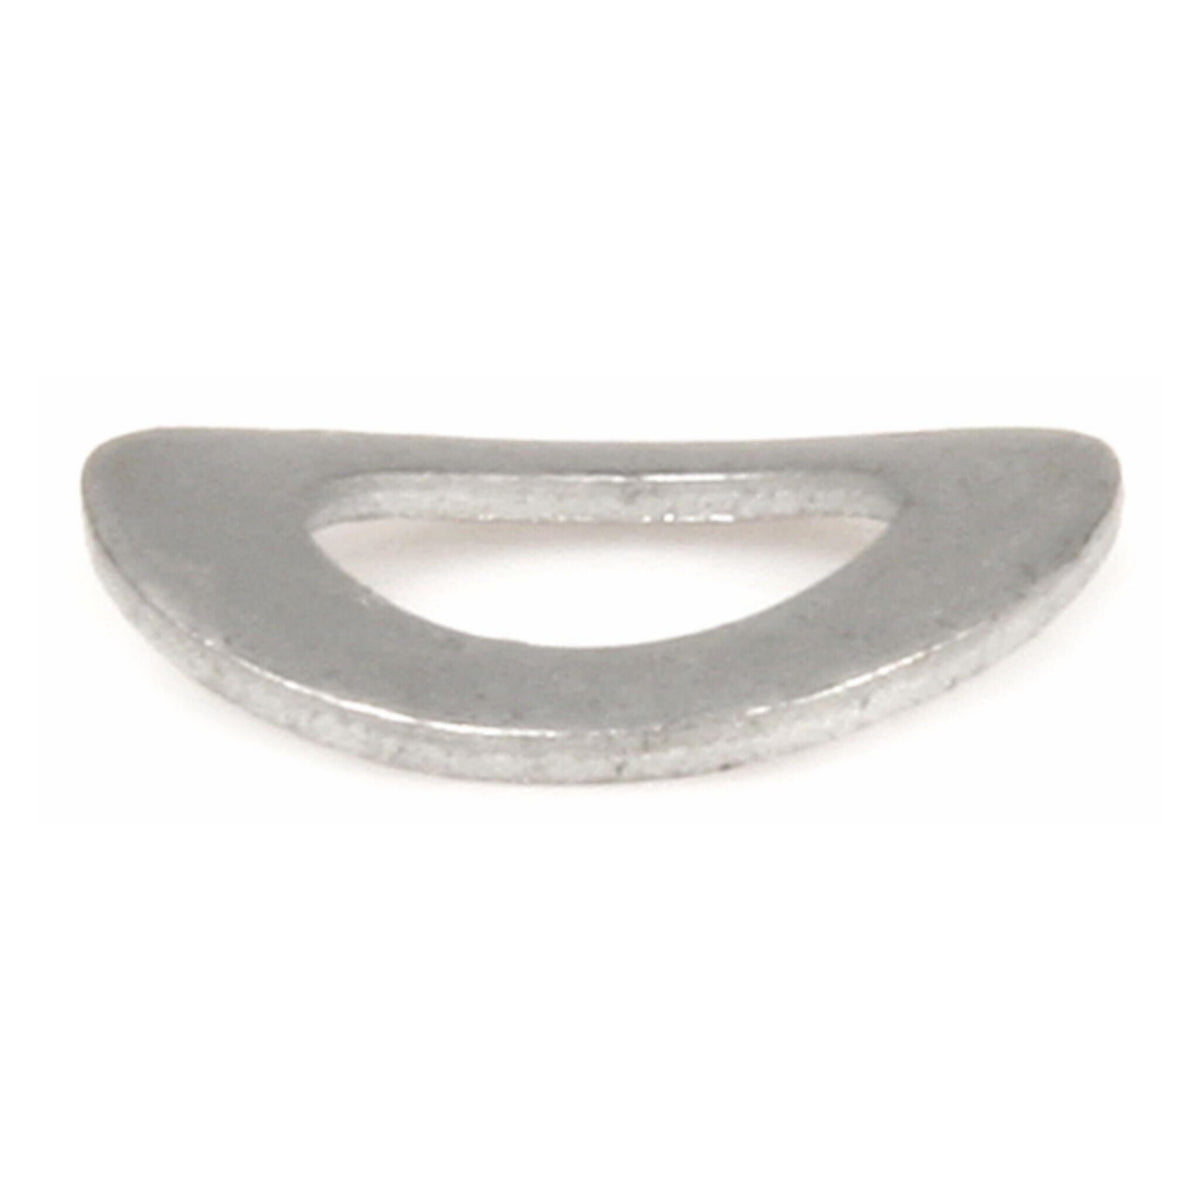 Stainless Steel Wavy Washer M8x15mm